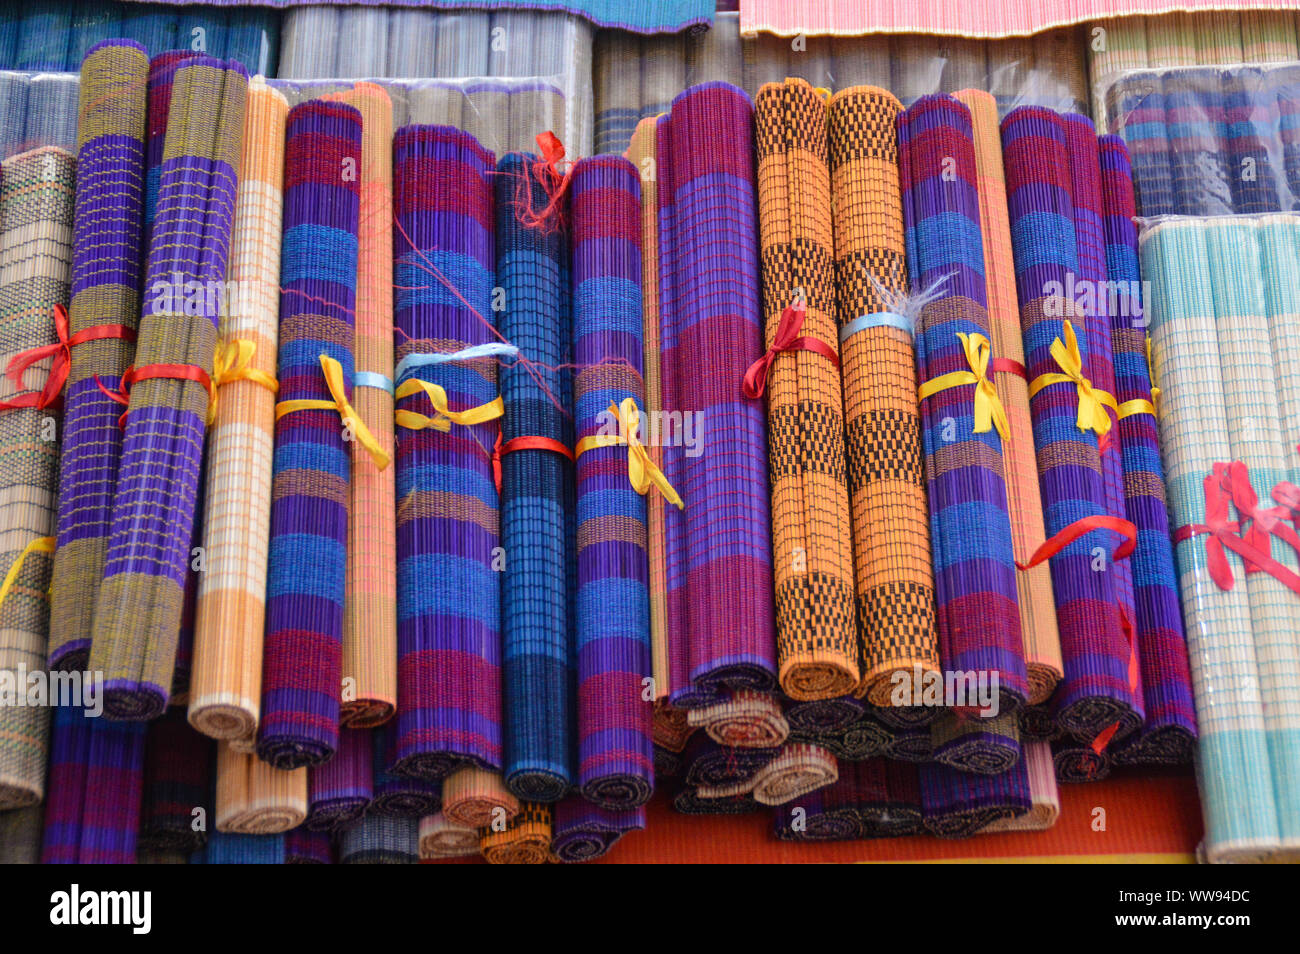 High angle view of hand-crafted bamboo place mats sold as souvenirs in Luang Prabang, Laos Stock Photo